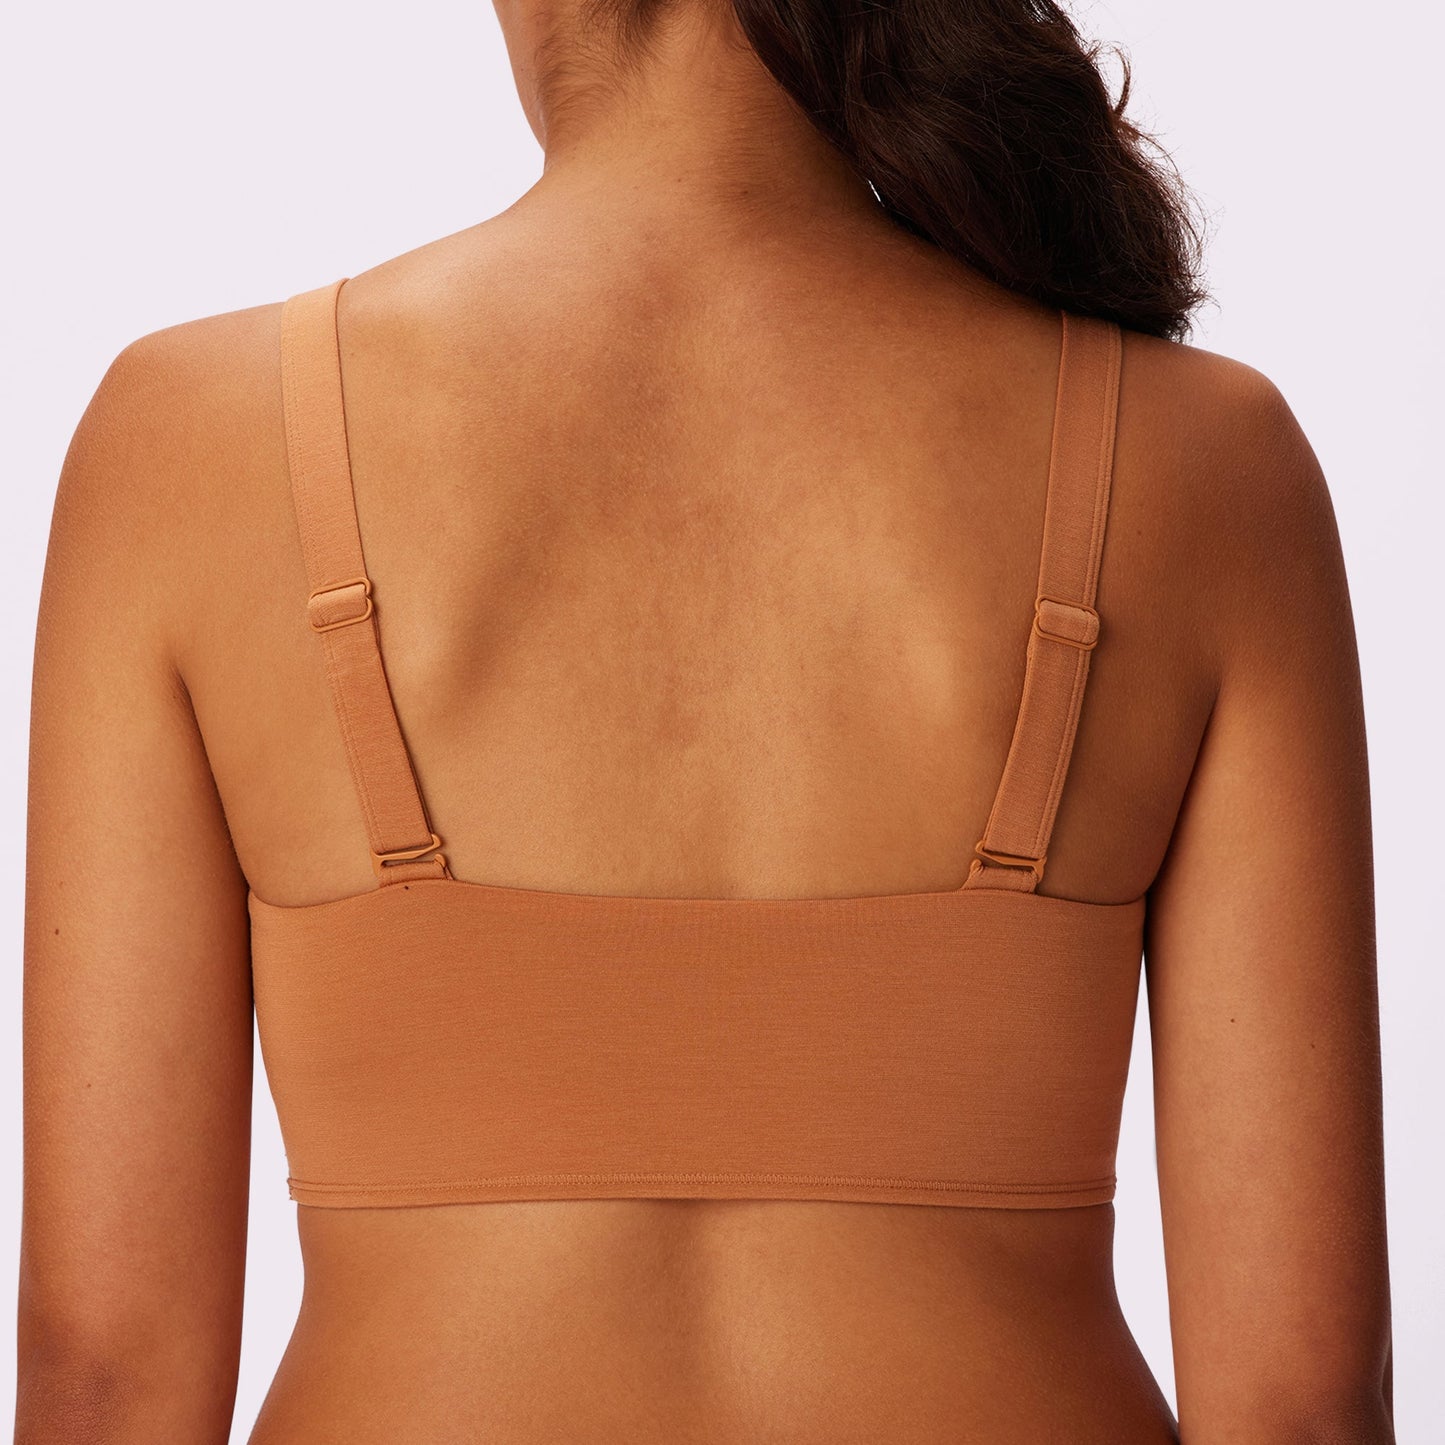 Vintage Soft Triangle Bralette | New:Cotton | Archive (Toast)